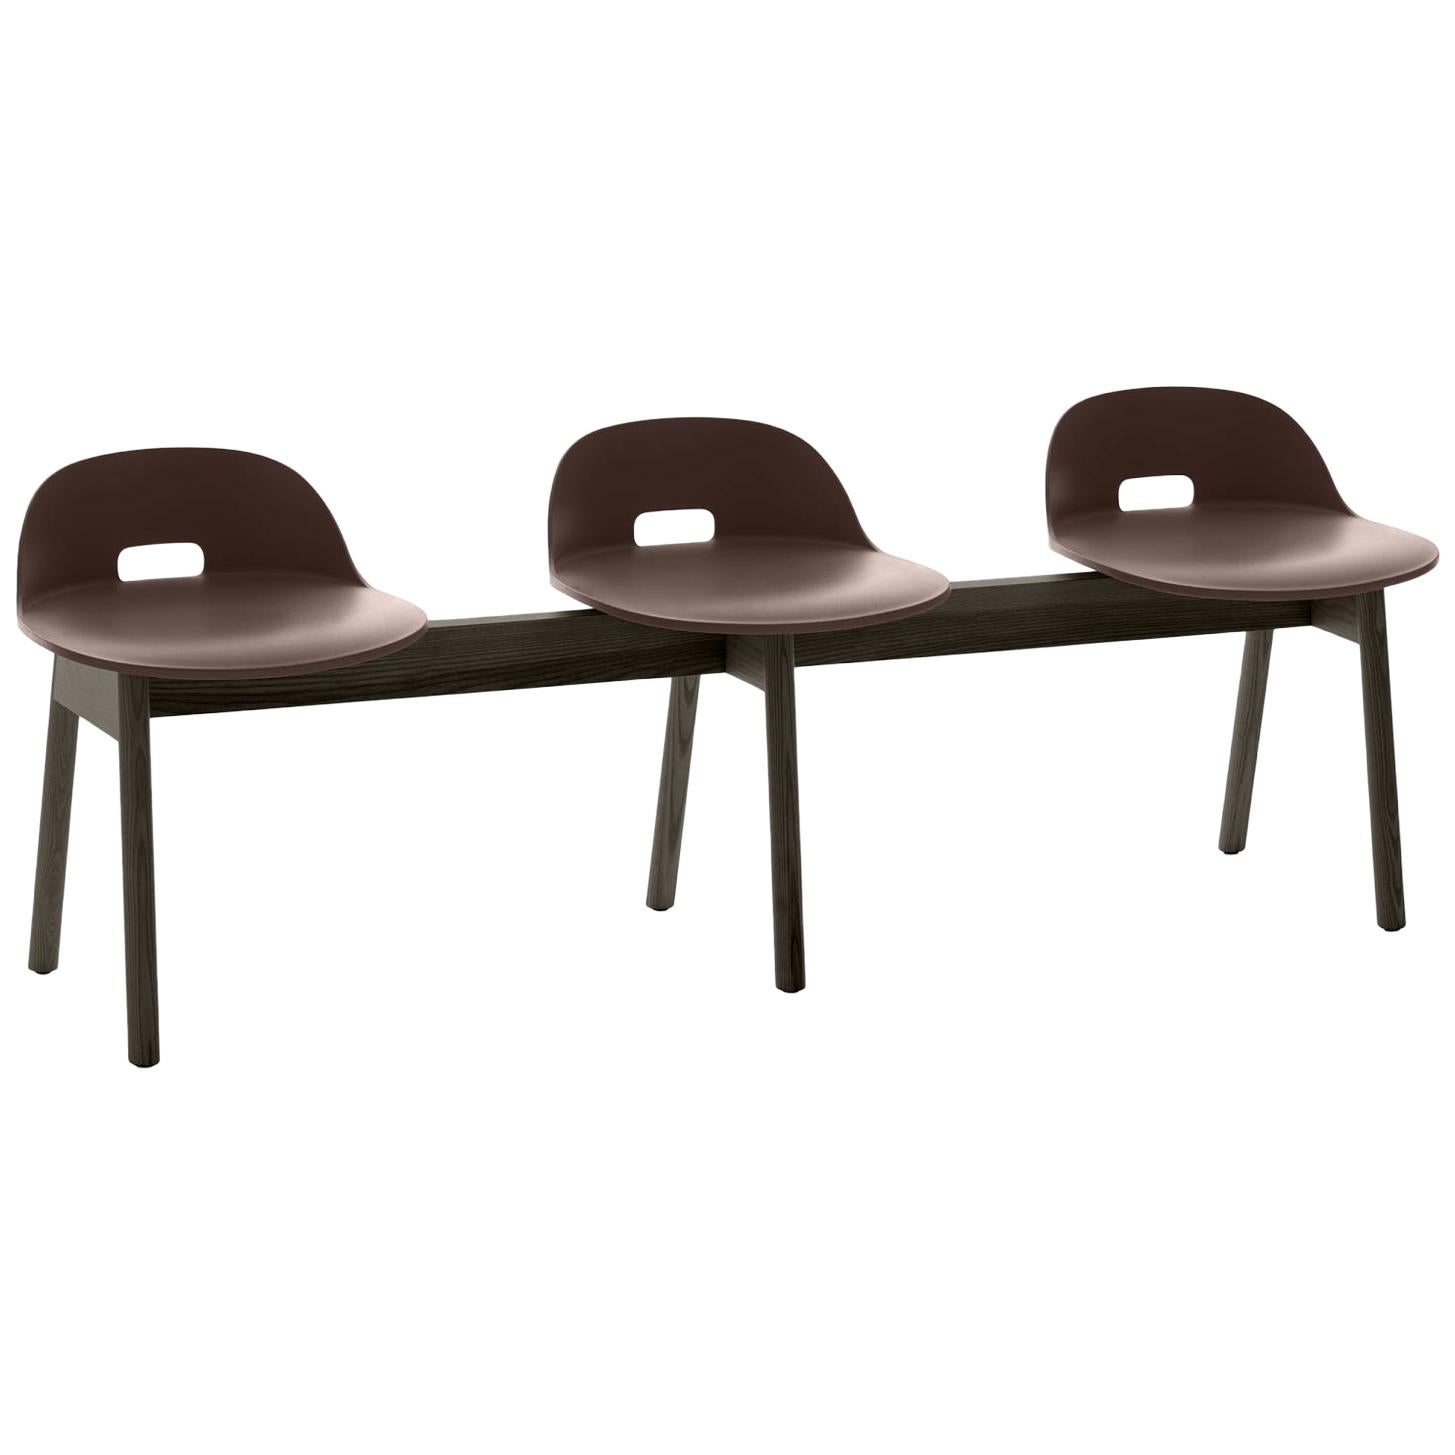 Emeco Alfi 3-Seat Bench in Brown and Dark Ash with Low Back by Jasper Morrison